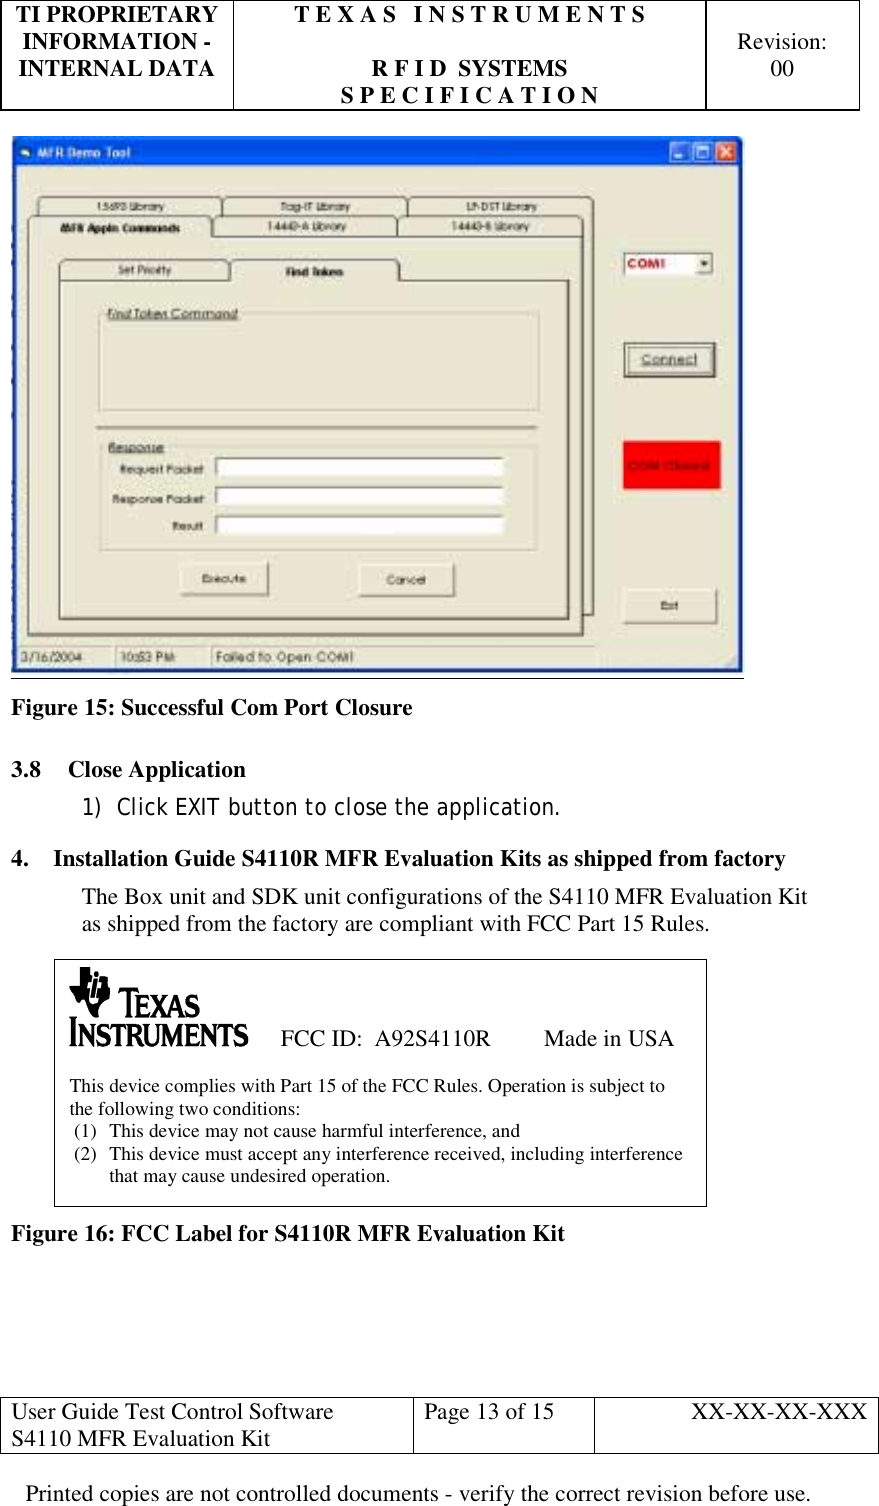 TI PROPRIETARY  T E X A S   I N S T R U M E N T S   INFORMATION -    Revision: INTERNAL DATA  R F I D  SYSTEMS  00   S P E C I F I C A T I O N     User Guide Test Control Software  S4110 MFR Evaluation Kit  Page 13 of 15  XX-XX-XX-XXX Printed copies are not controlled documents - verify the correct revision before use.  Figure 15: Successful Com Port Closure 3.8 Close Application 1)  Click EXIT button to close the application. 4.  Installation Guide S4110R MFR Evaluation Kits as shipped from factory The Box unit and SDK unit configurations of the S4110 MFR Evaluation Kit as shipped from the factory are compliant with FCC Part 15 Rules.           Figure 16: FCC Label for S4110R MFR Evaluation Kit      FCC ID:  A92S4110R         Made in USA  This device complies with Part 15 of the FCC Rules. Operation is subject to the following two conditions: (1)  This device may not cause harmful interference, and (2)  This device must accept any interference received, including interference that may cause undesired operation. 